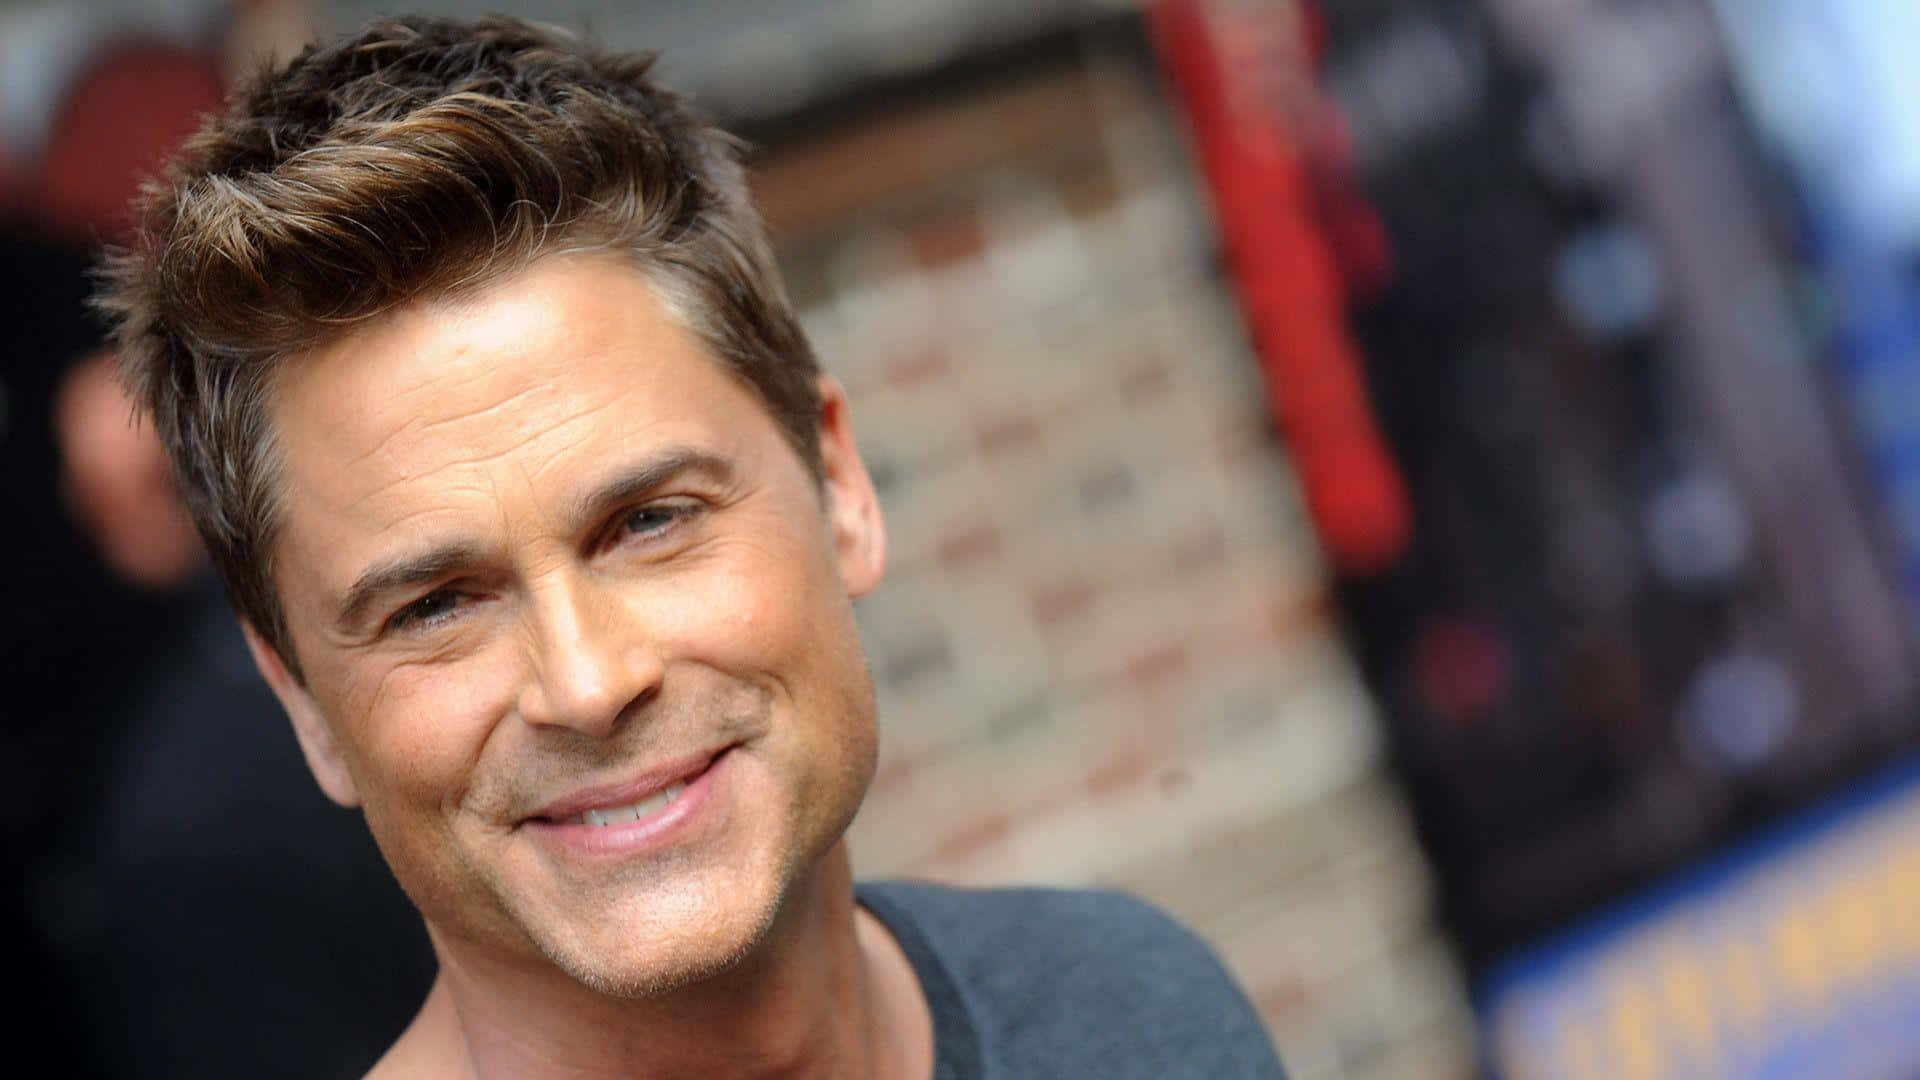 Roblowe Is An Actor Known For His Roles In Movies And Tv Shows. He Has Appeared In Films Such As 